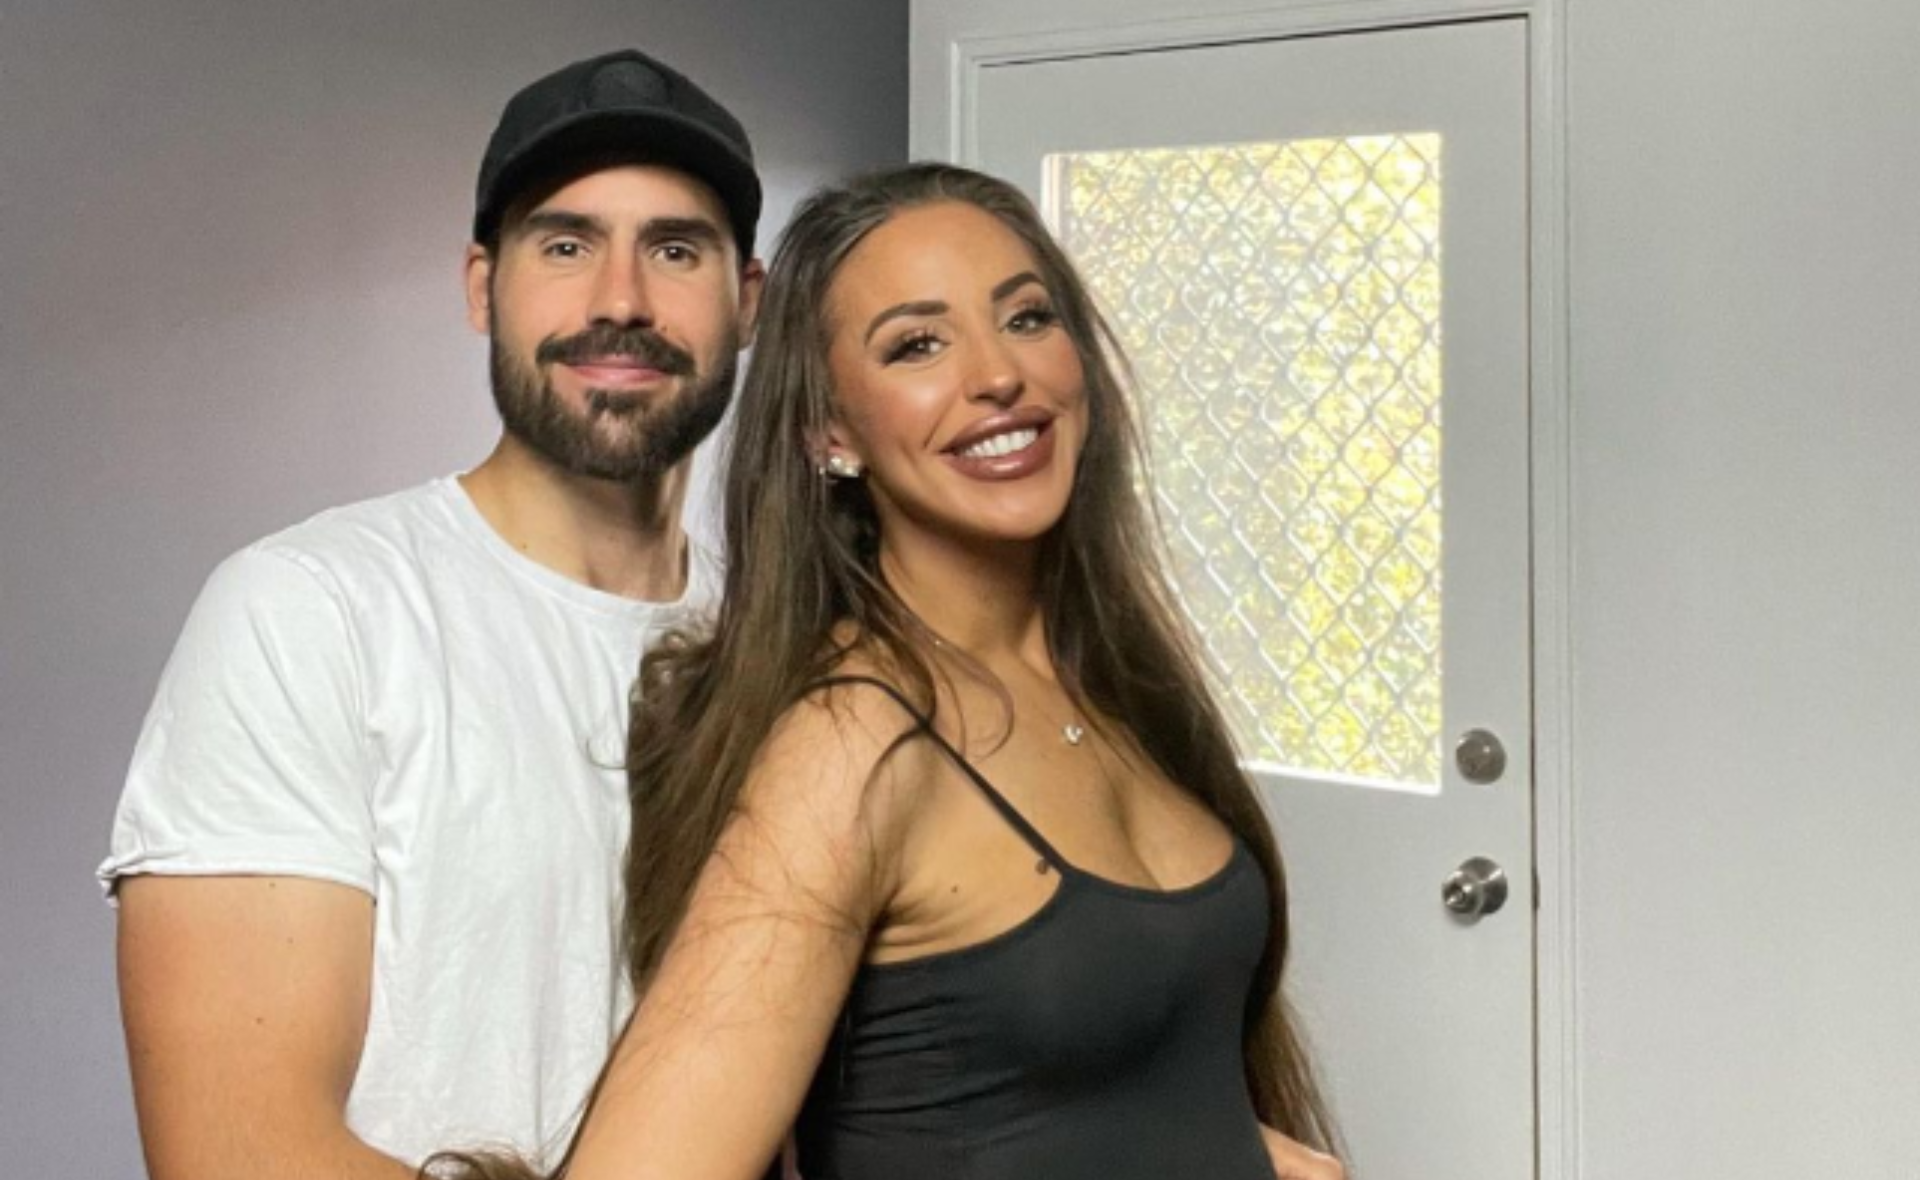 MAFS’ Lizzie Sobinoff has welcomed her first child with husband, Alexander